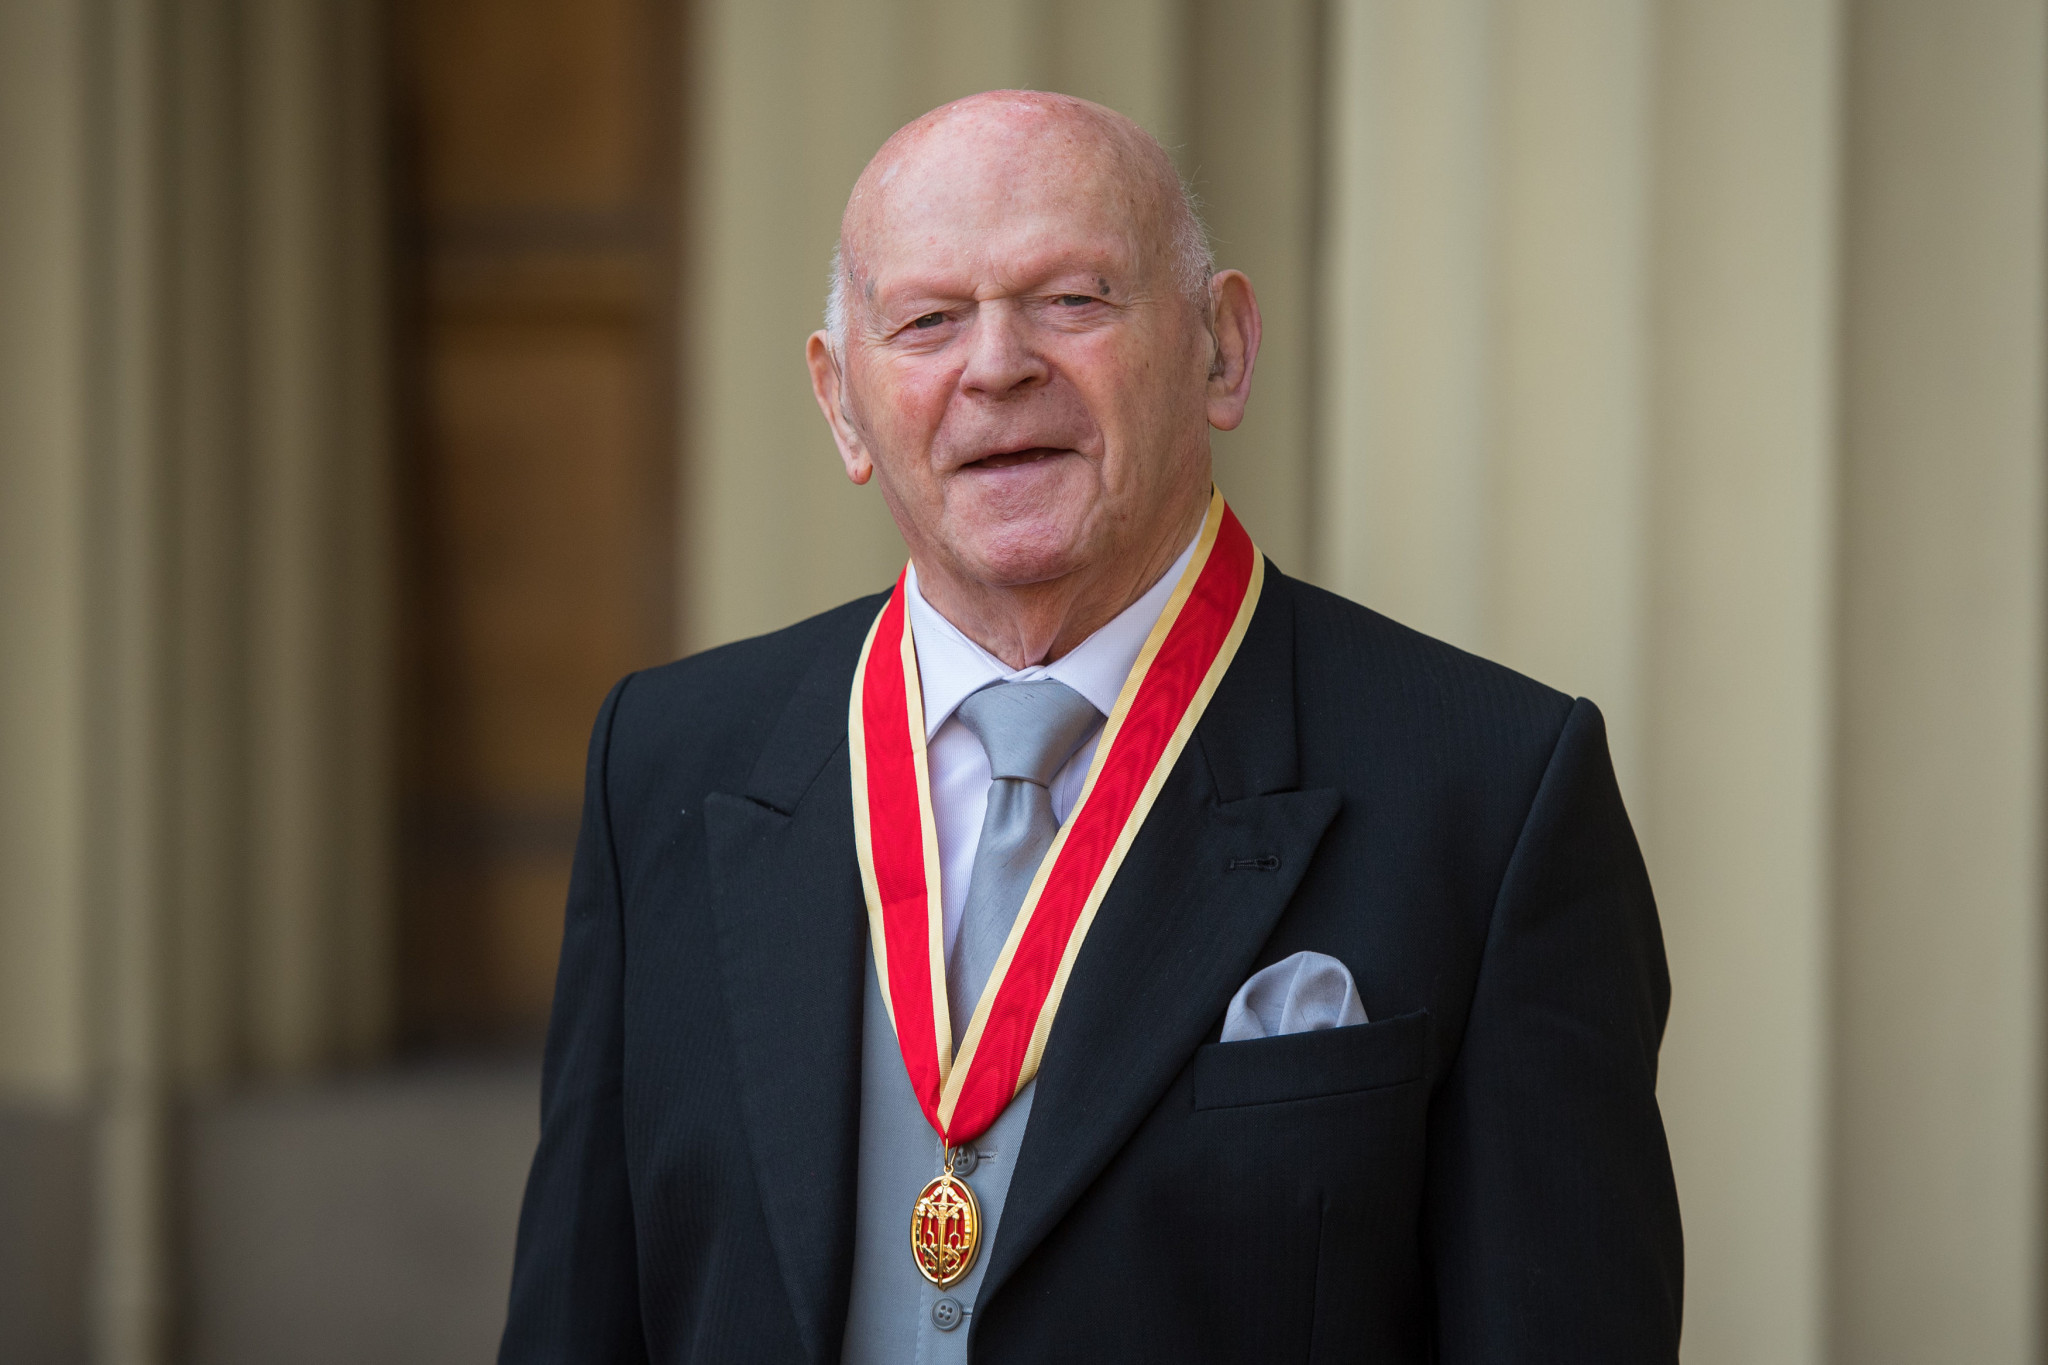 Sir Ben Helfgott was knighted in 2008 for services to Holocaust Remembrance and Education ©Getty Images